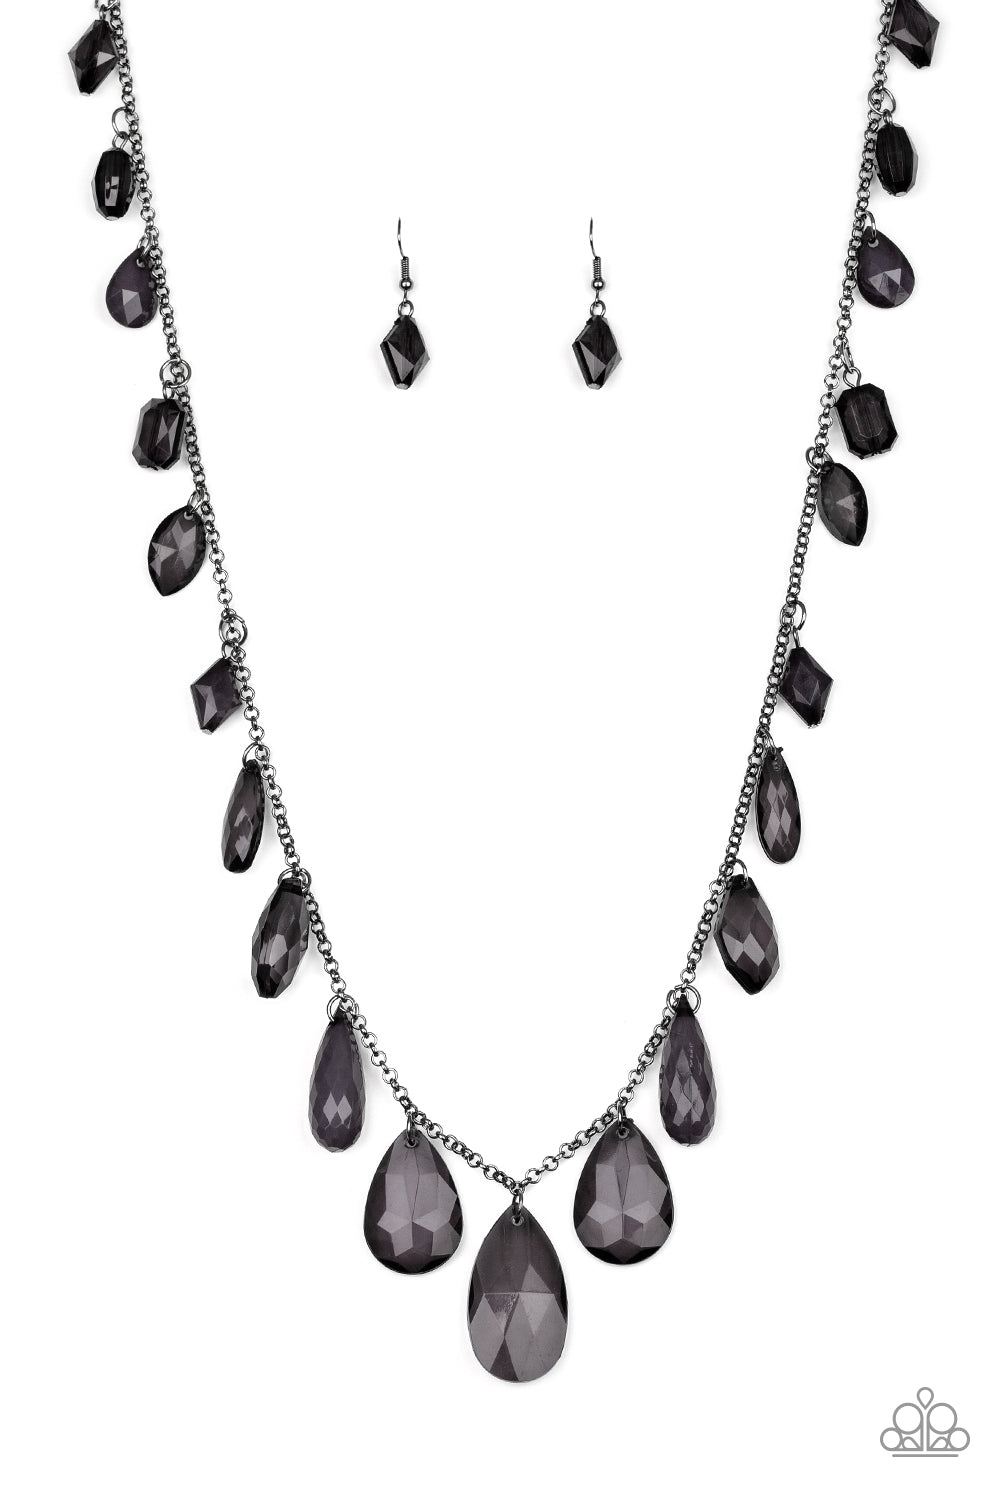 GLOW And Steady Wins The Race Black Necklace - Paparazzi Accessories